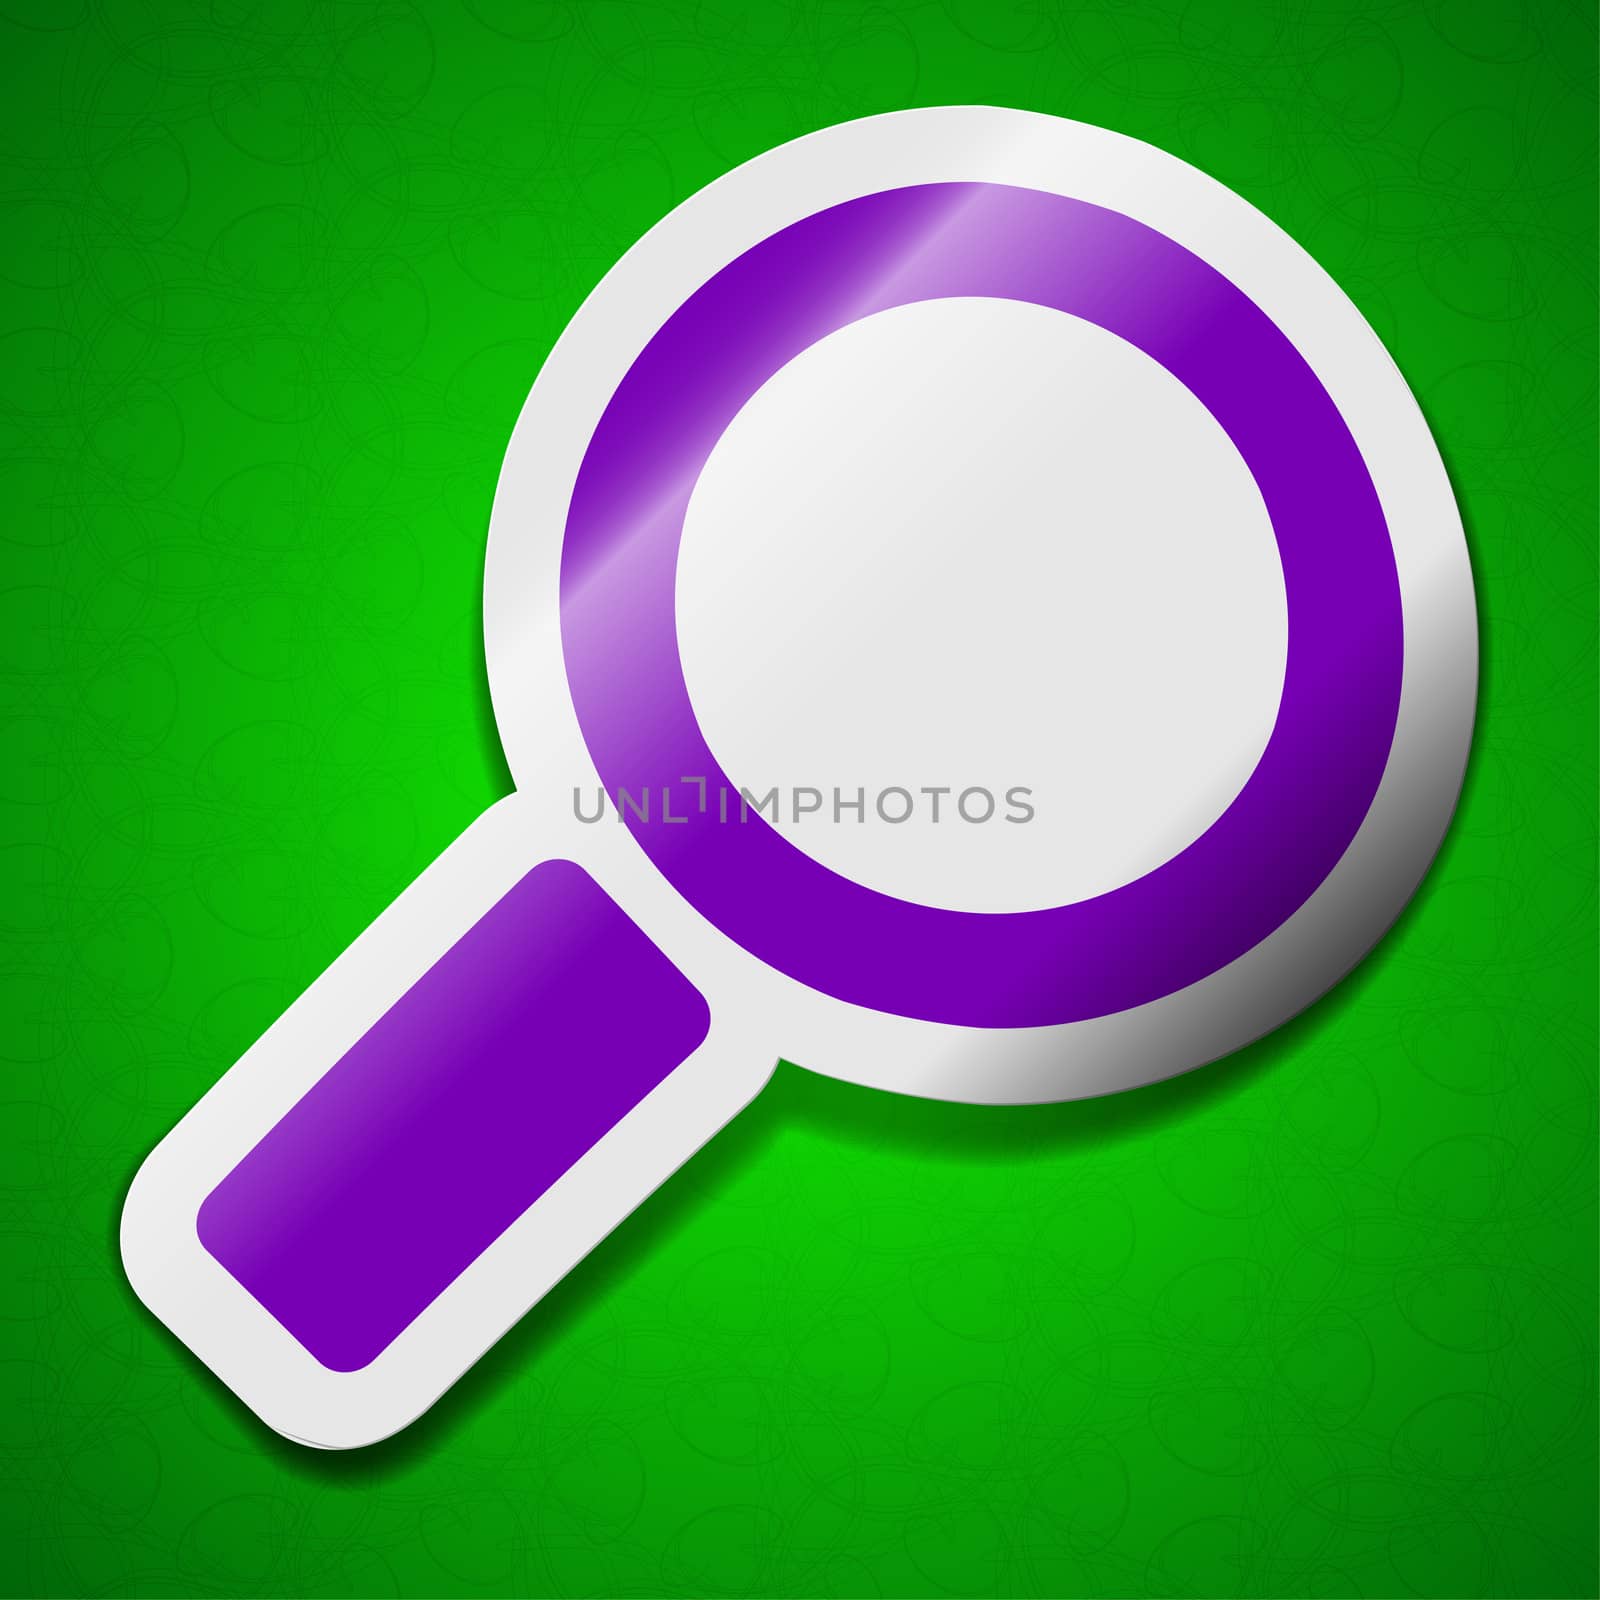 Magnifier glass icon sign. Symbol chic colored sticky label on green background.  illustration